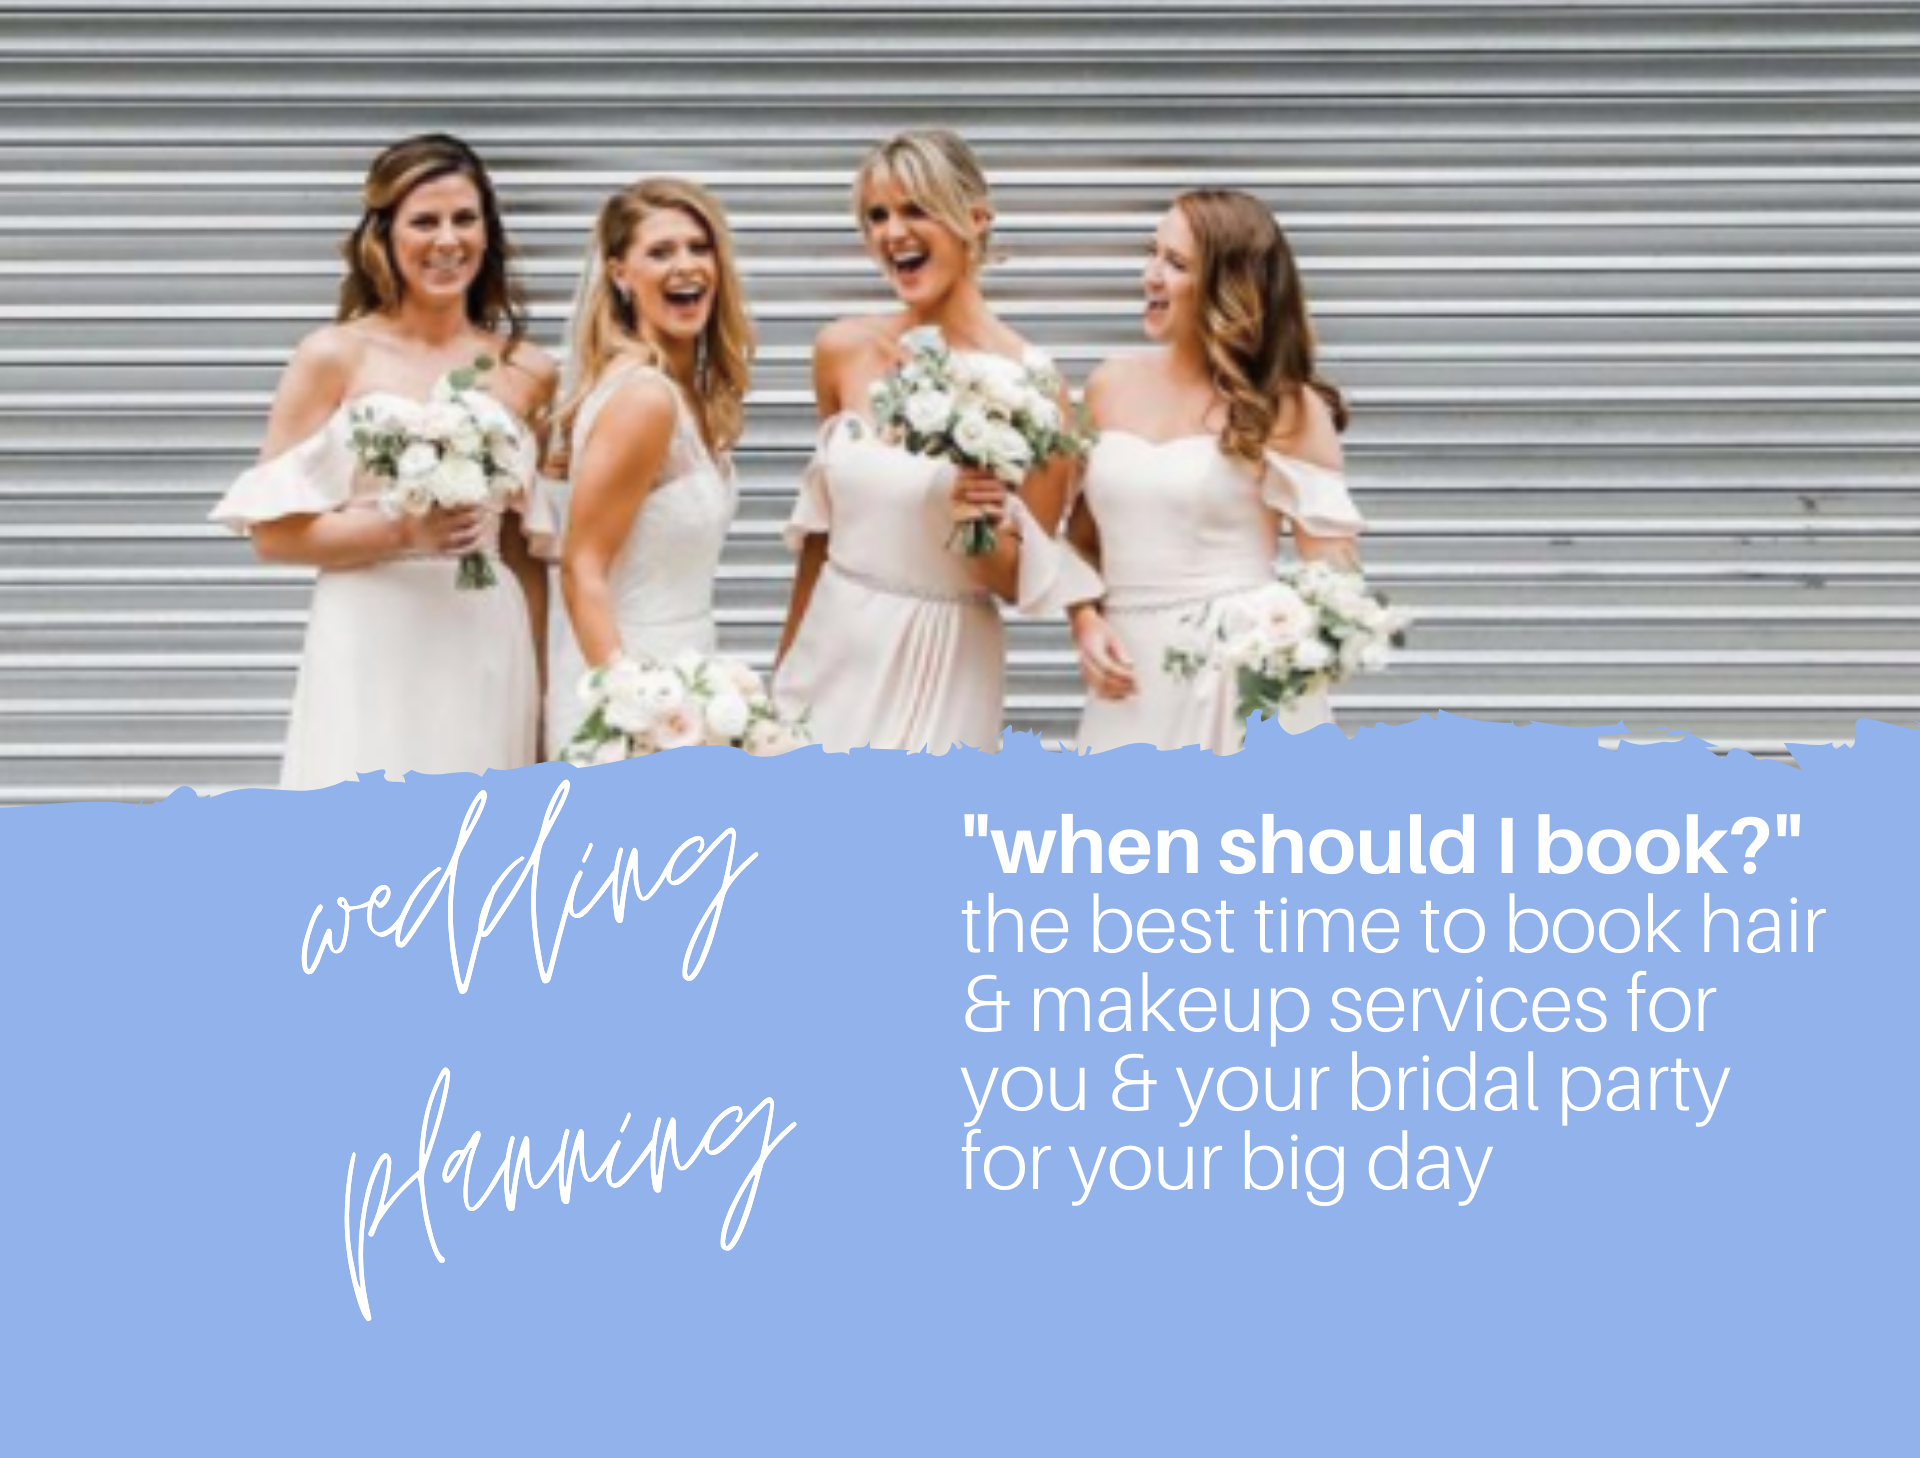 Wedding Planning: Best Time to Book Hair & Makeup Services For Your Wedding  - mg hair & makeup